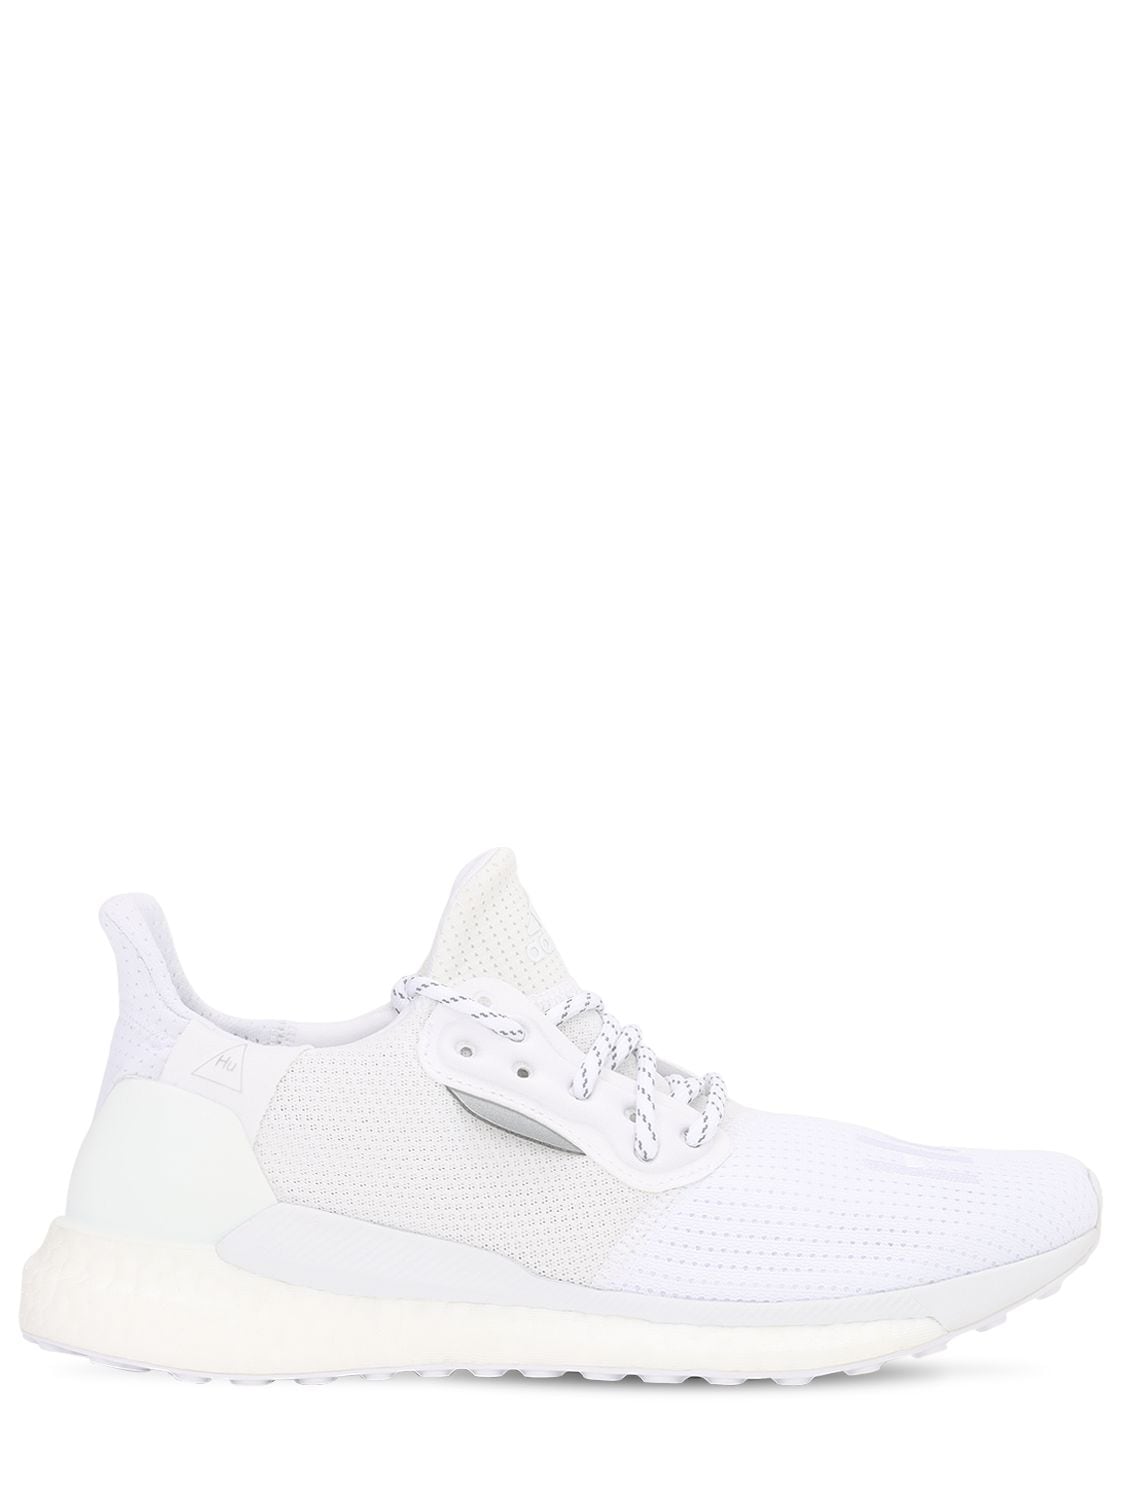 Adidas Originals By Pharrell Williams Solar Hu Boost Sneakers In White